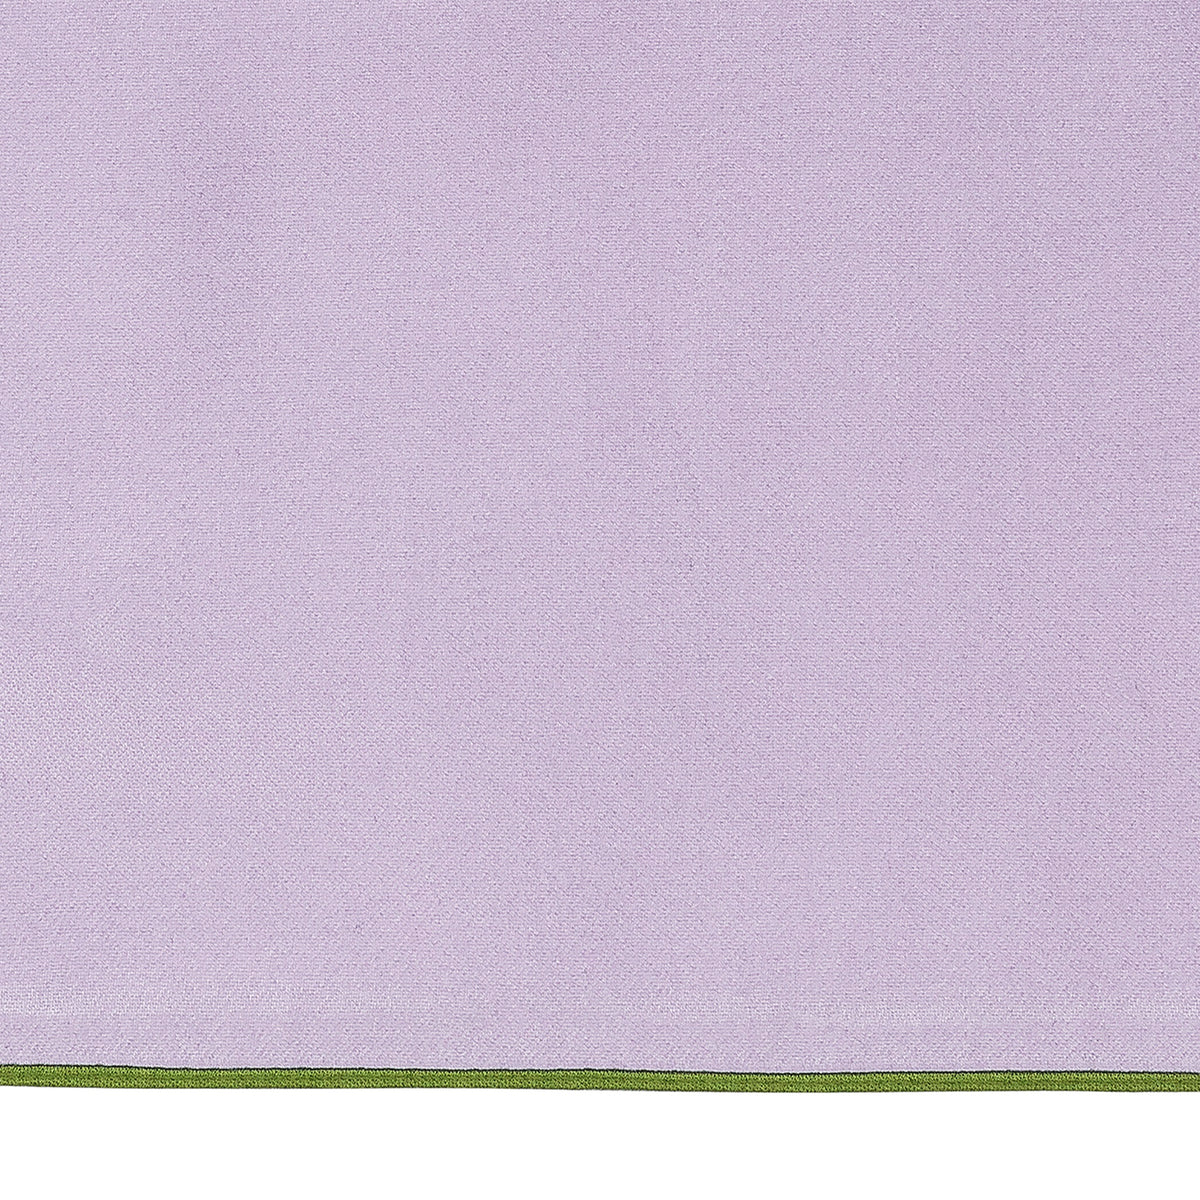 Swatch Sample of Matouk Nocturne Pajama Set in Color Violet and Grass